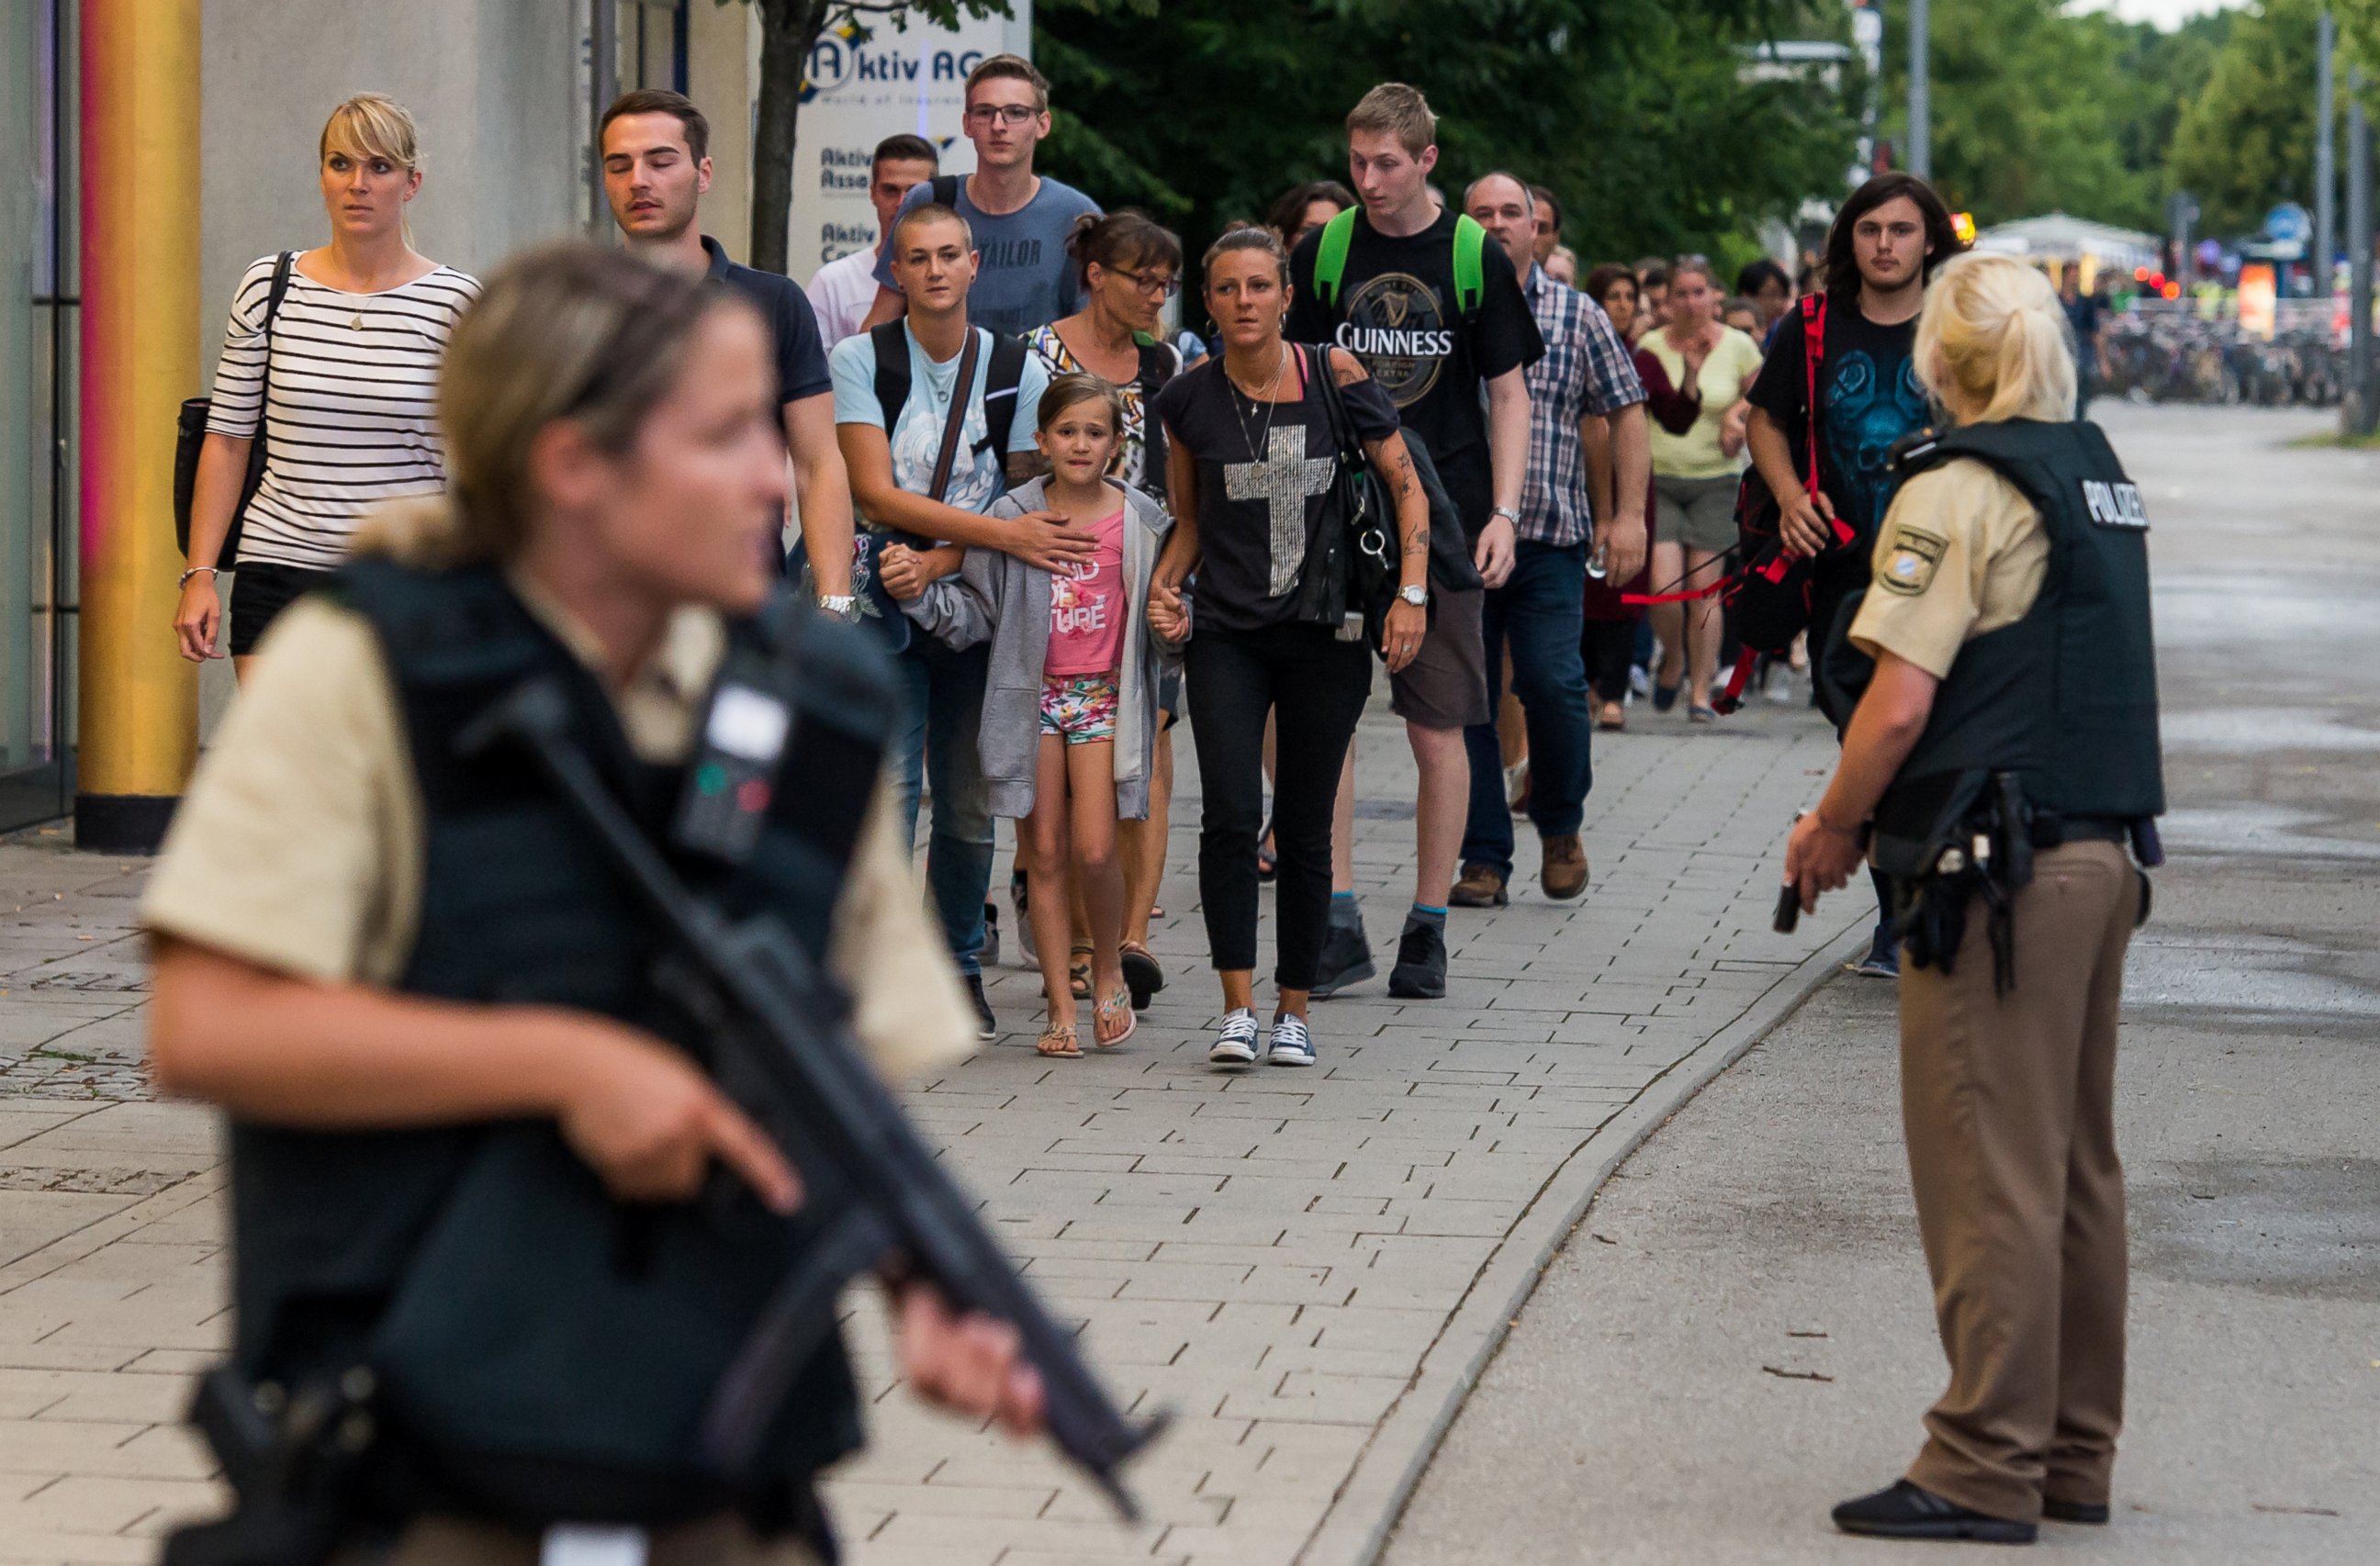 PHOTO: Police officers escort people from inside the shopping center as they respond to a shooting at the Olympia Einkaufzentrum on  July 22, 2016 in Munich.